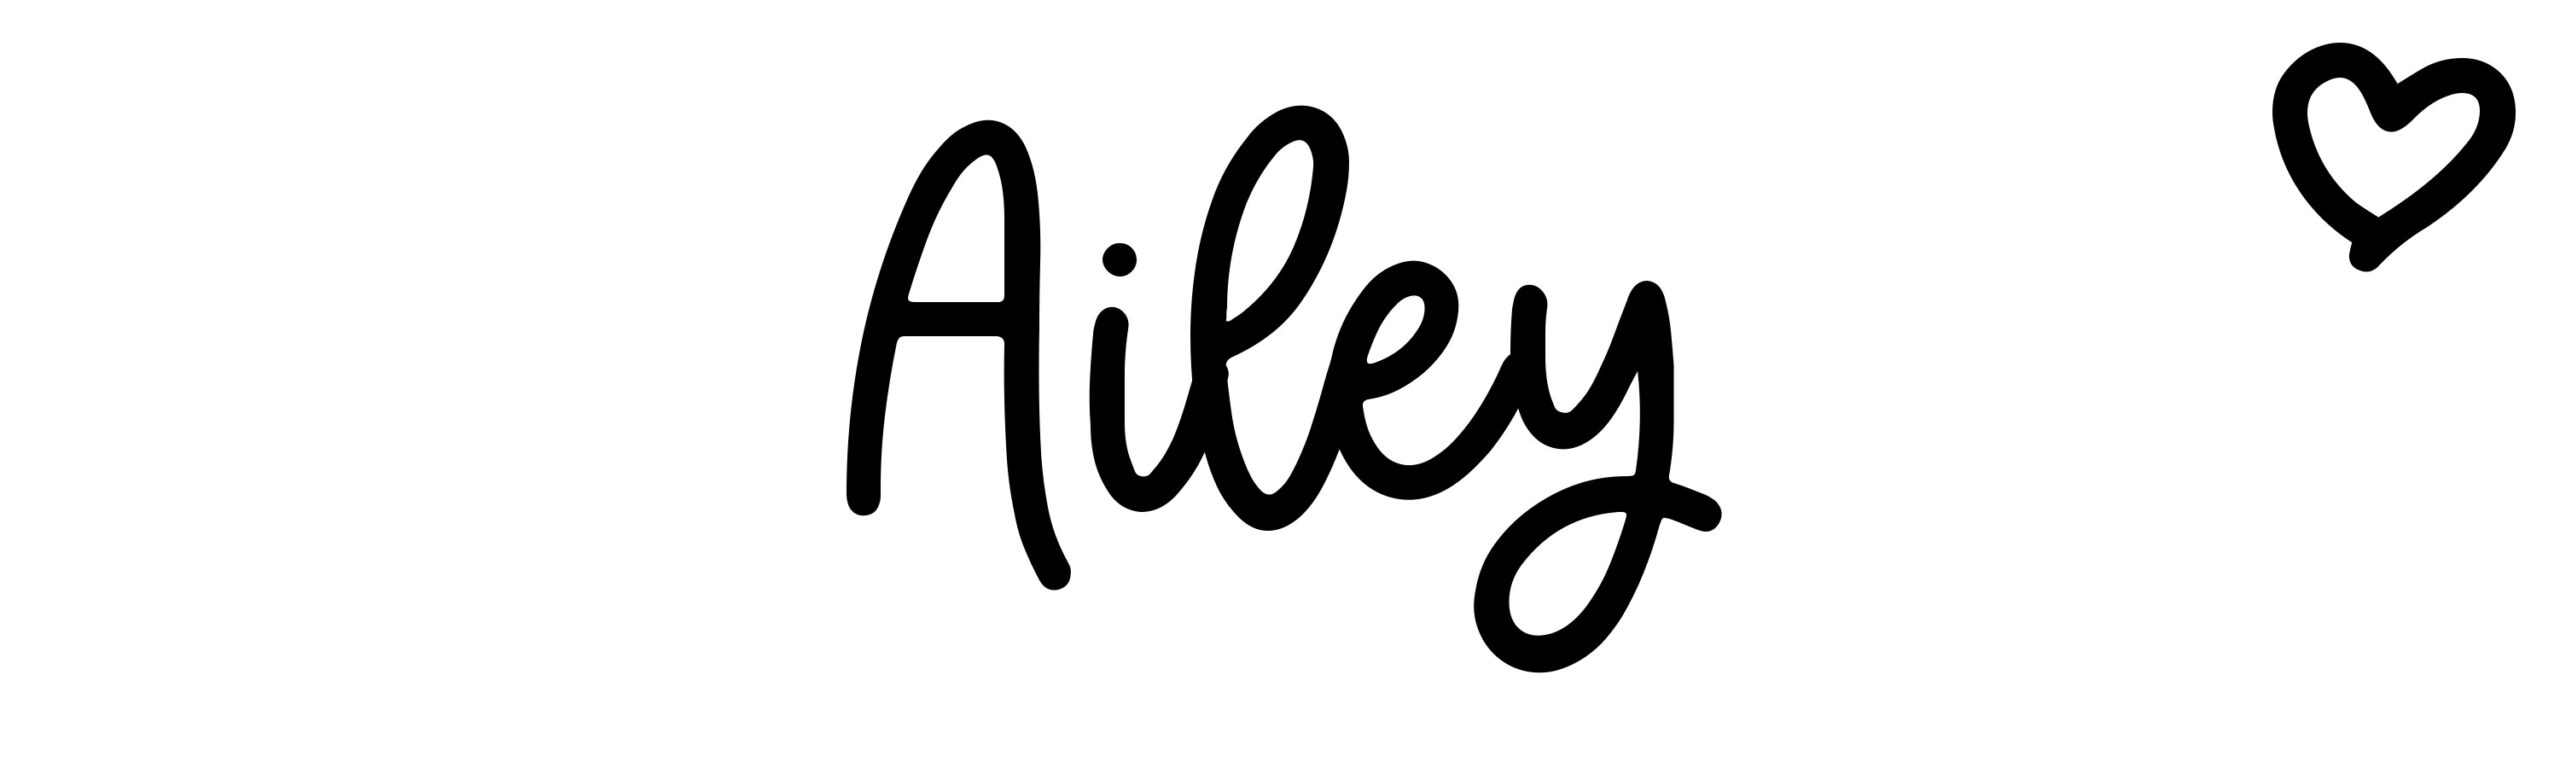 Ailey - Name meaning, origin, variations and more